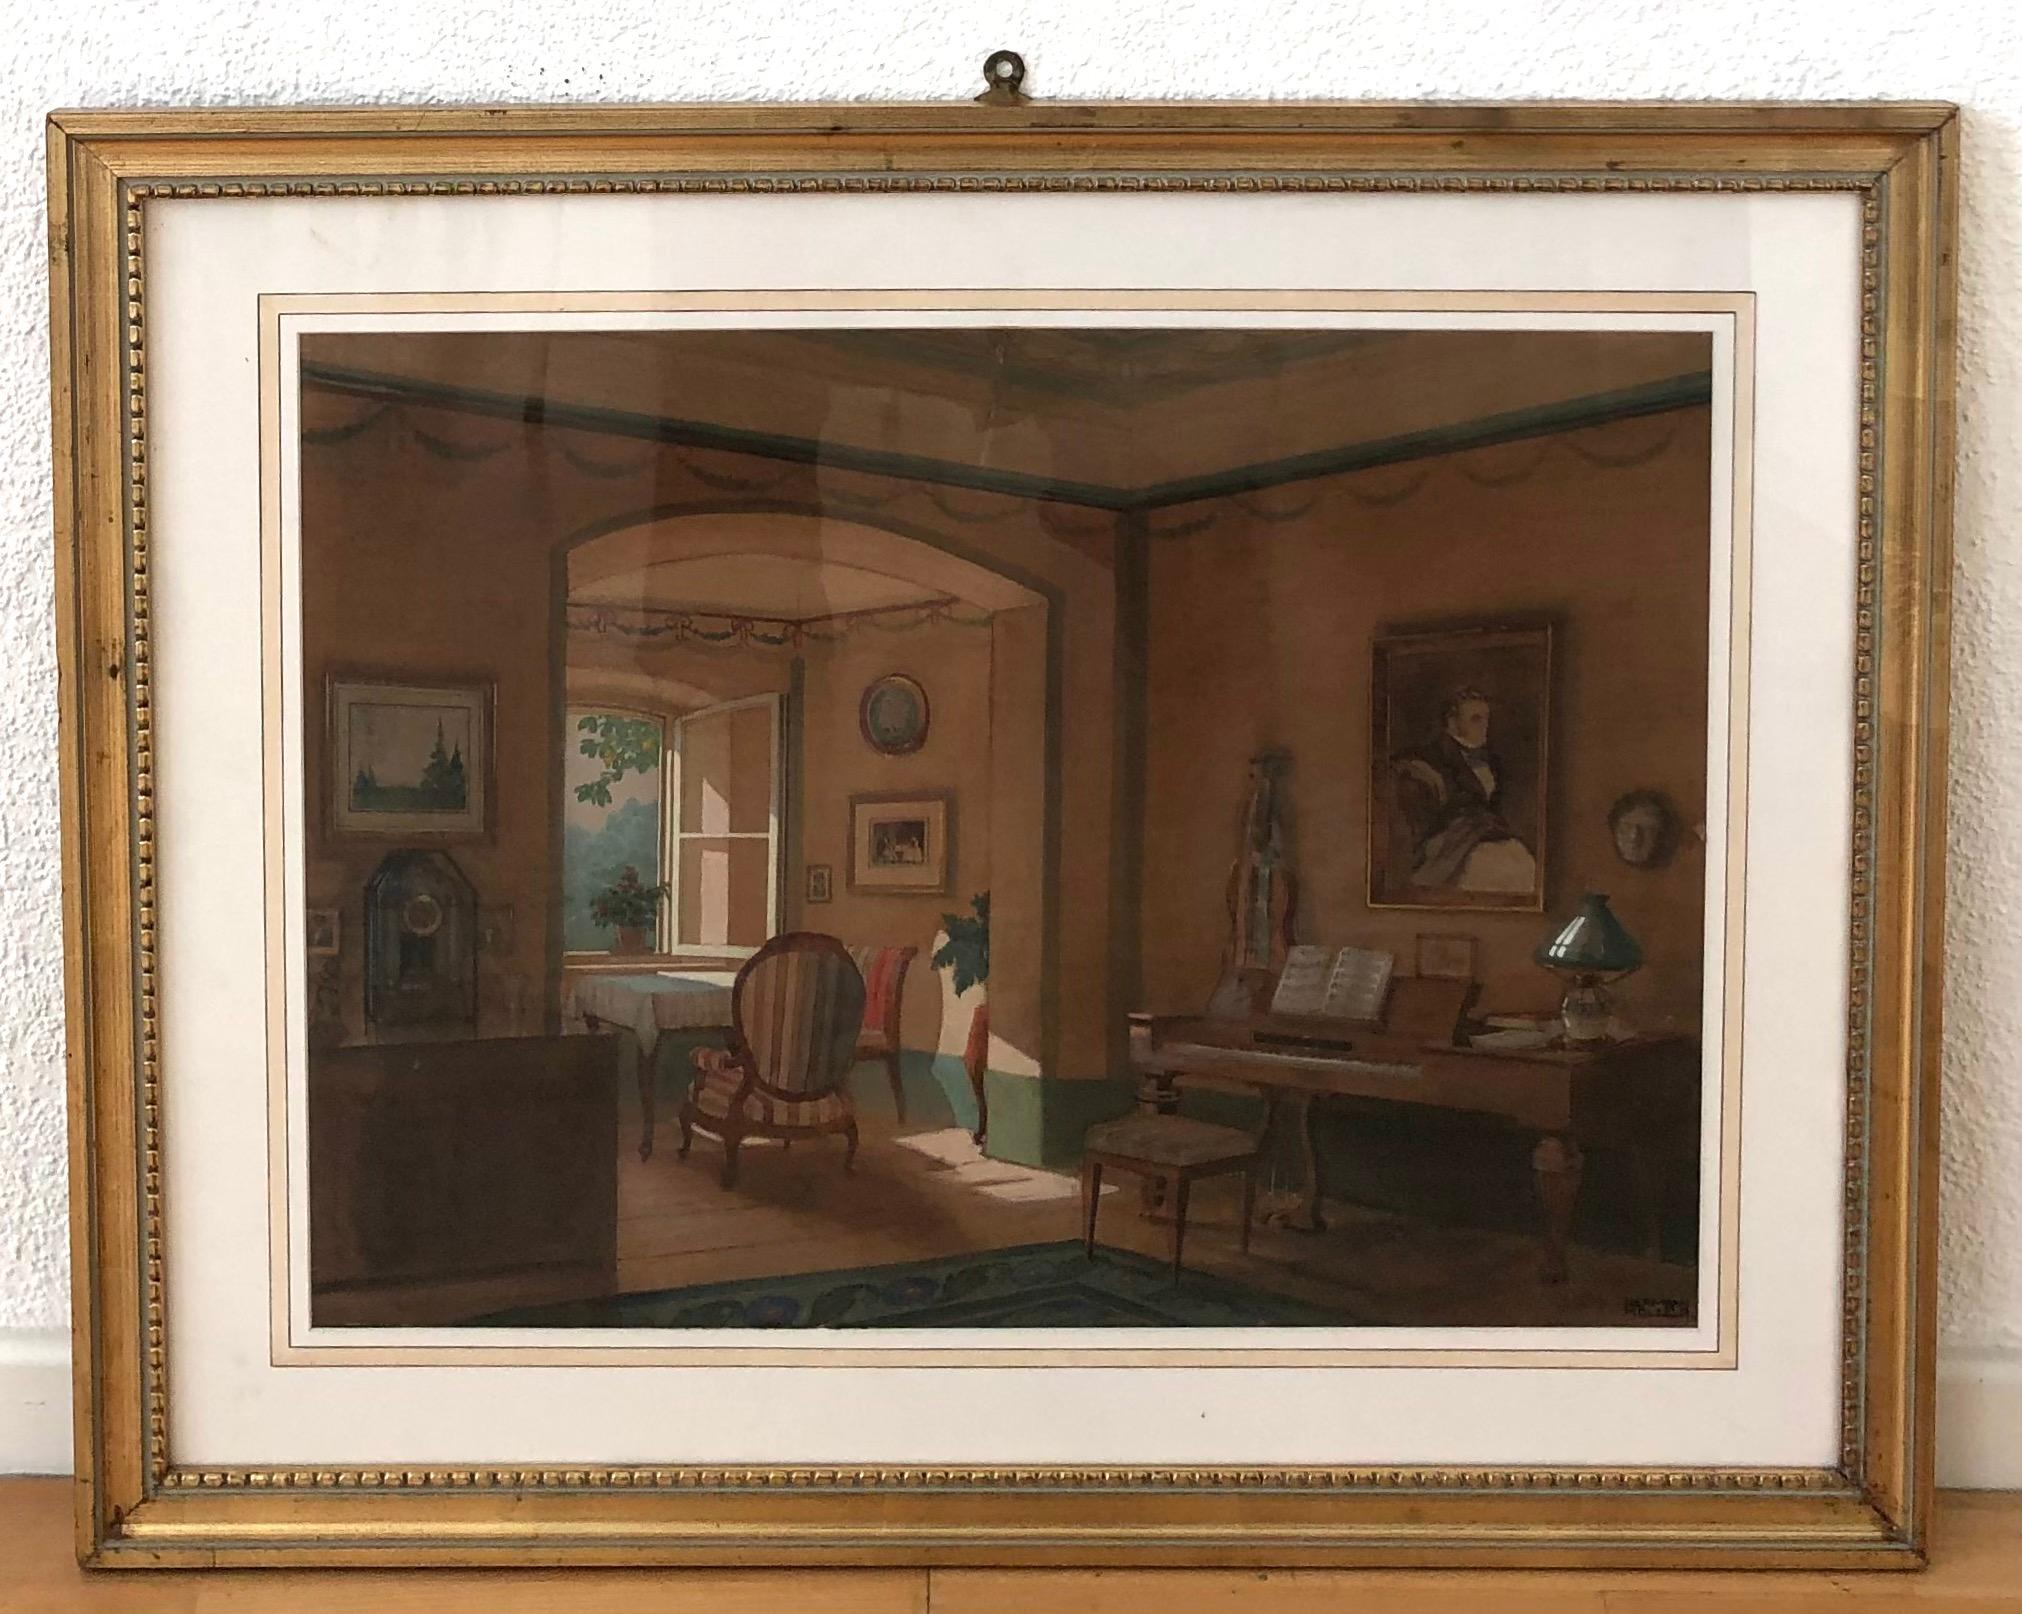 19th century interior - Painting by Herman Moller